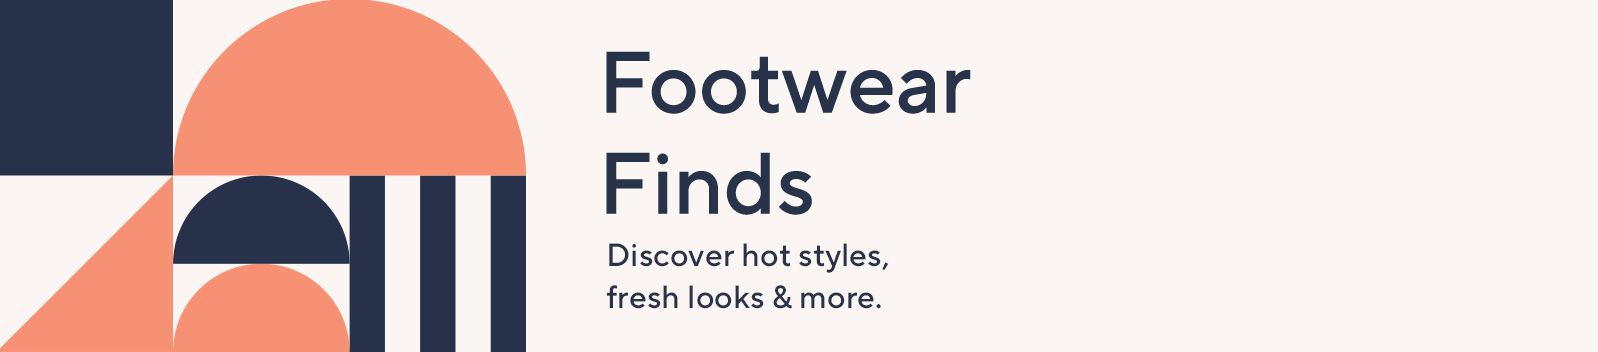 Footwear Finds: Discover hot styles, fresh looks & more.